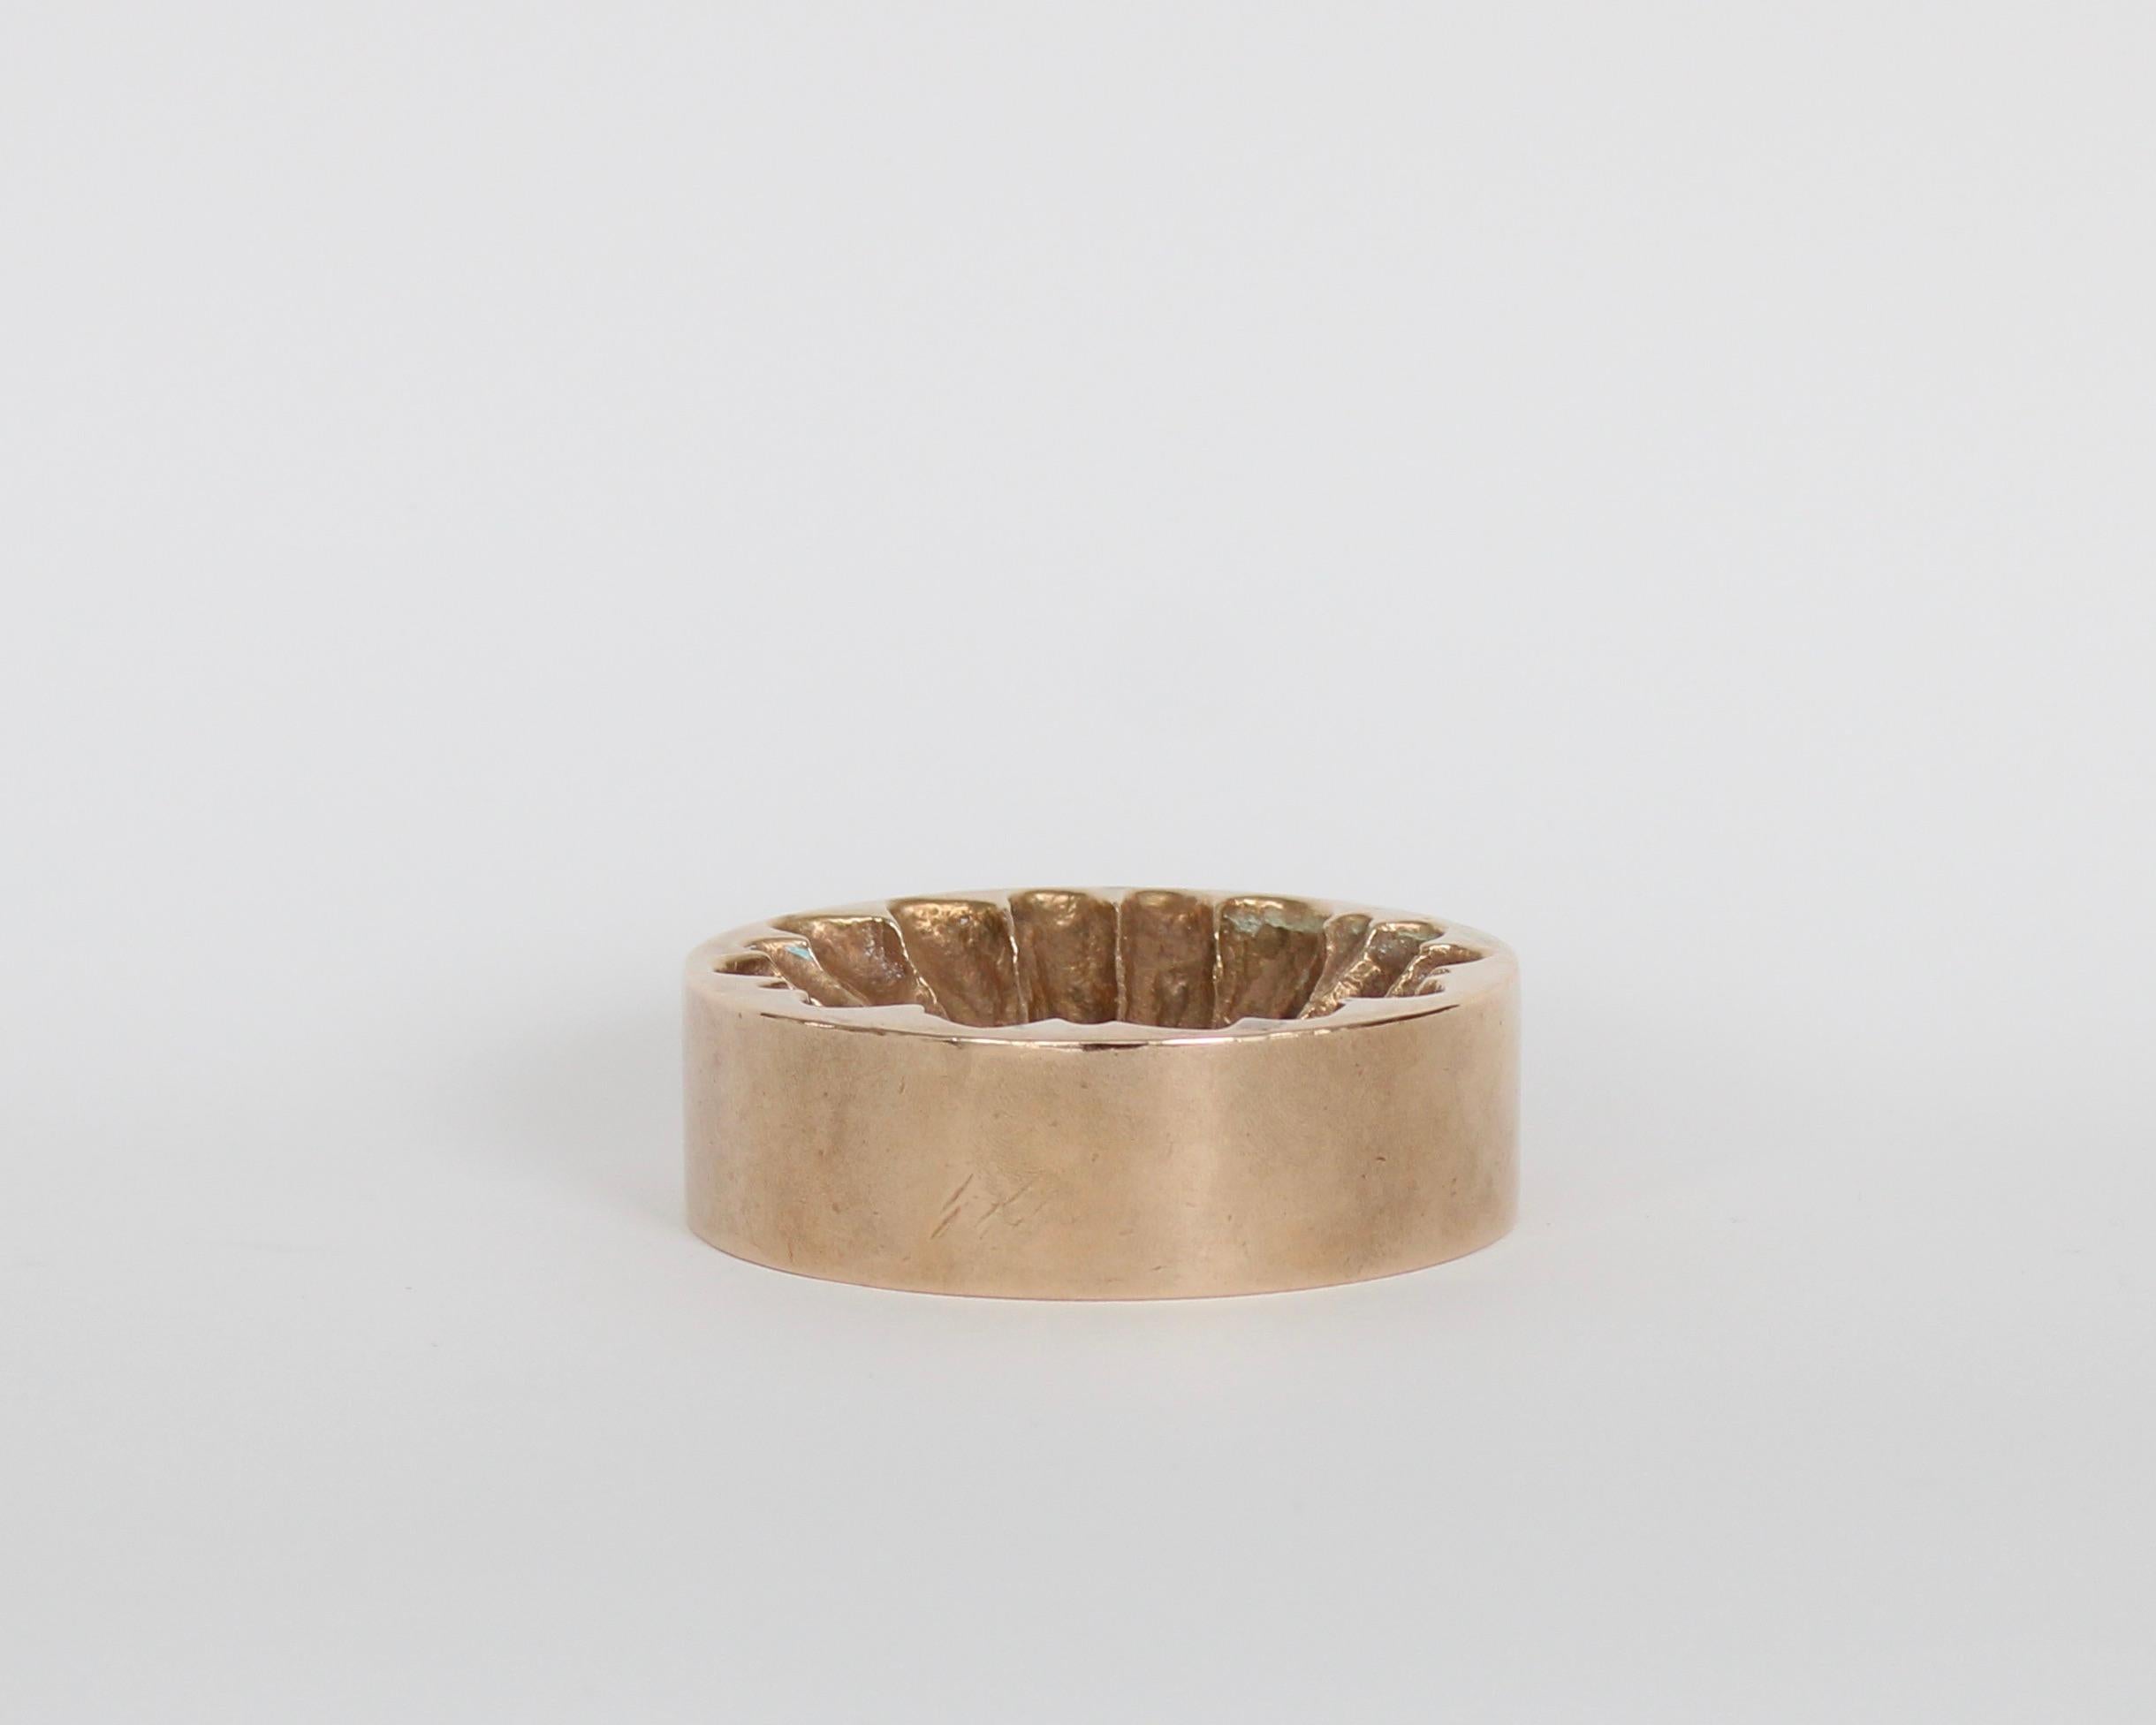 A bronze vide poche or decorative dish by French artist Monique Gerber in the motif of a daisy or Marguerite. This bottom of this vide poche once had felt on the bottom which has left a patina. 
Also the signature is much larger and unique.